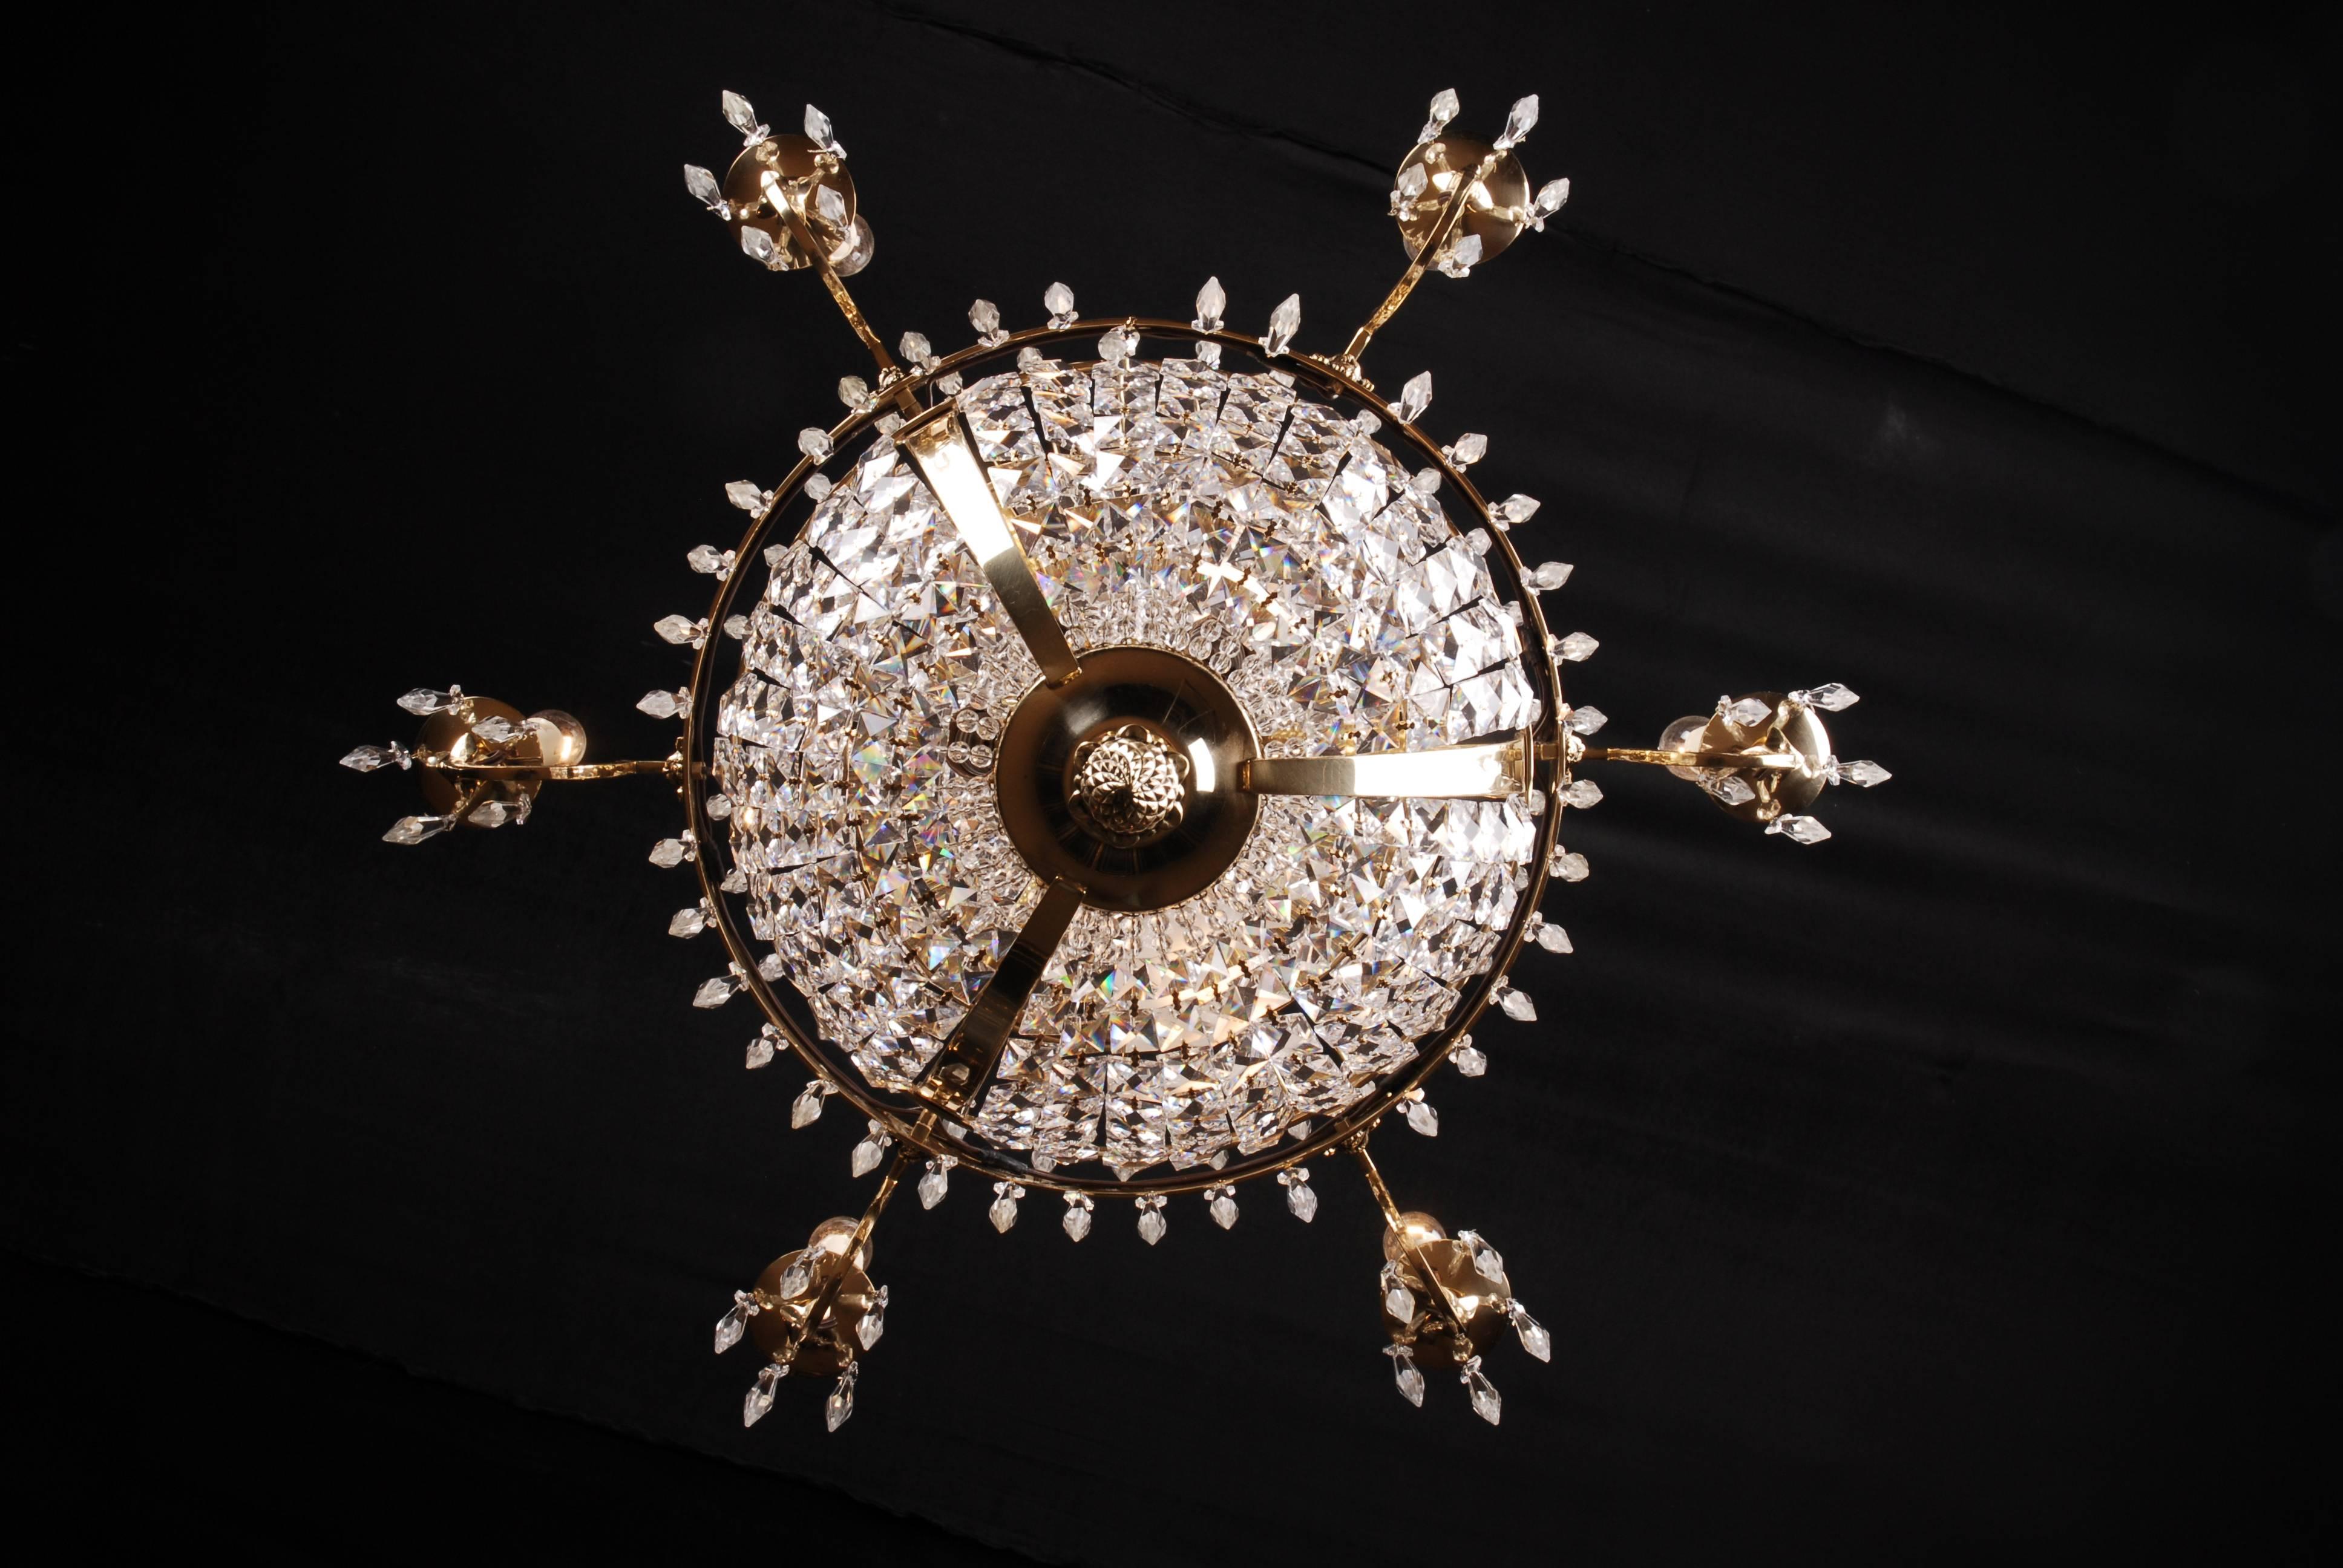 Swedish Empire Ceiling Chandelier in Classicist Style 4